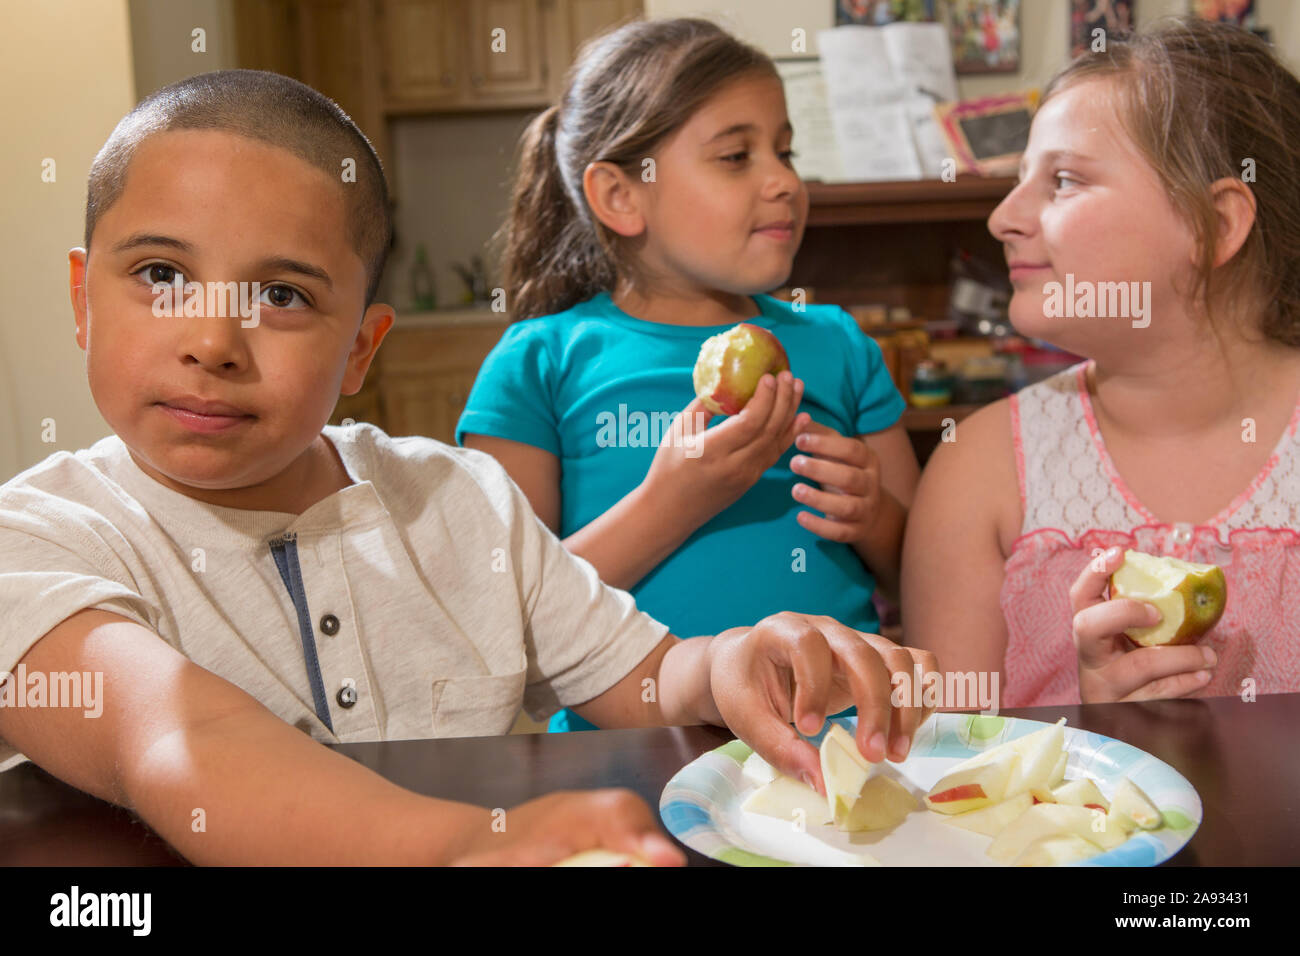 Hispanic boy with Autism eating apple with his sisters at home Stock Photo